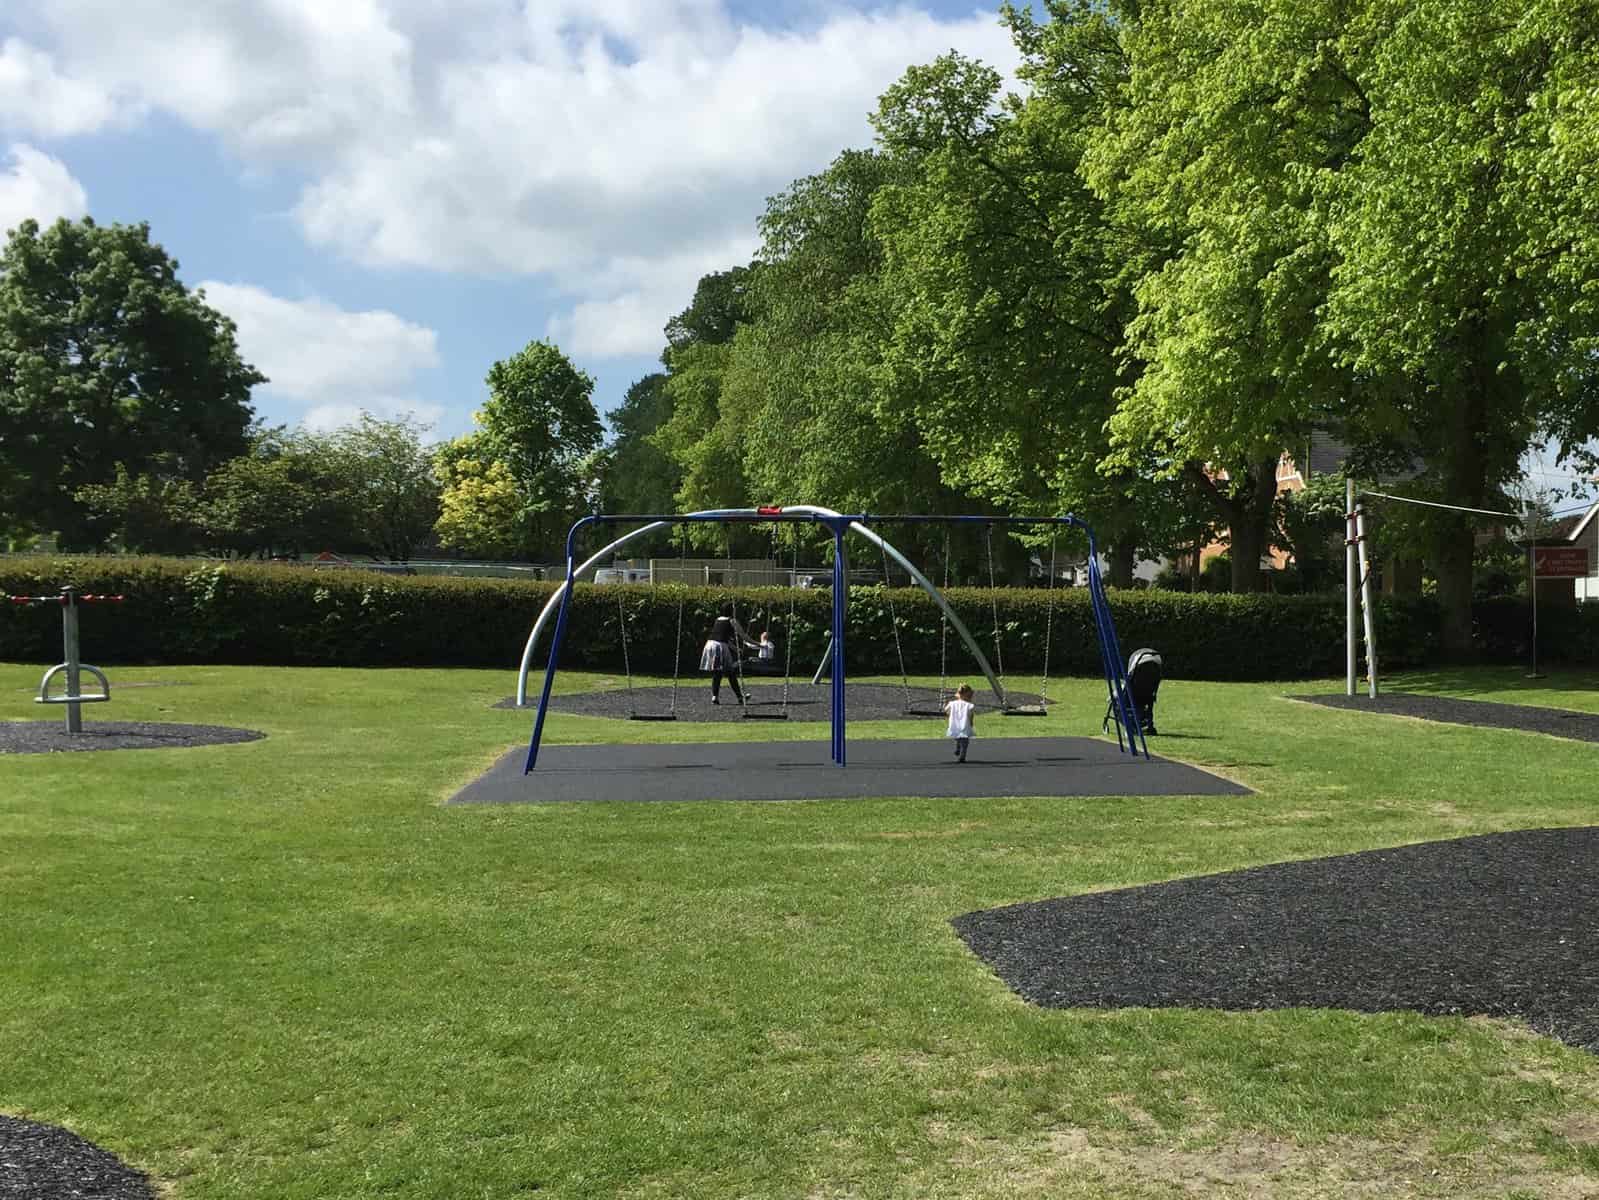 26th May 2016 - New Swings and Zip Wire installed and park refurbished